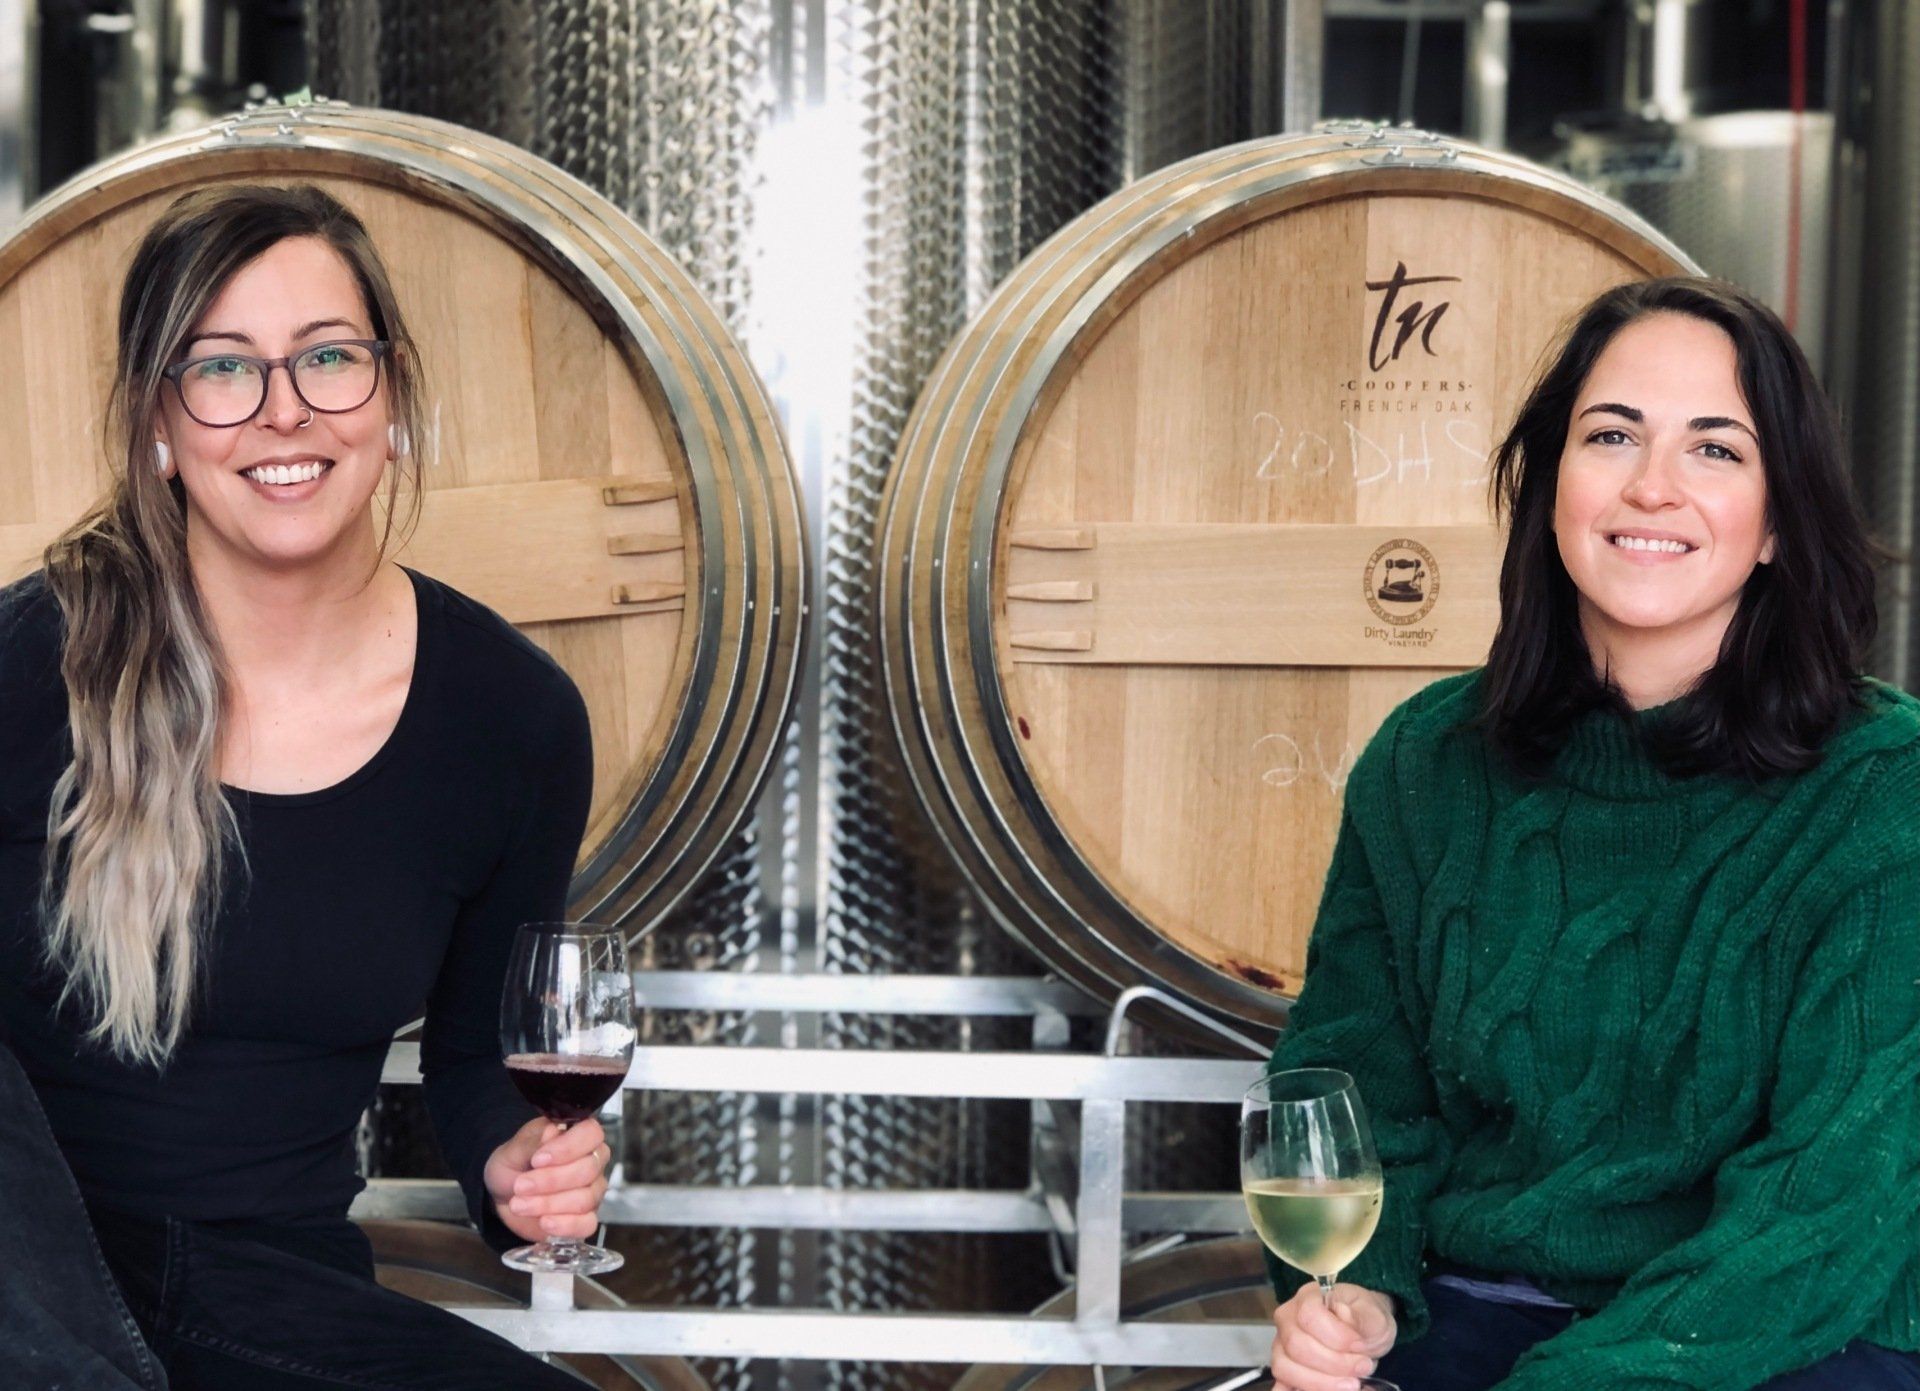 Bree and Stephanie - The Women Behind The Wine